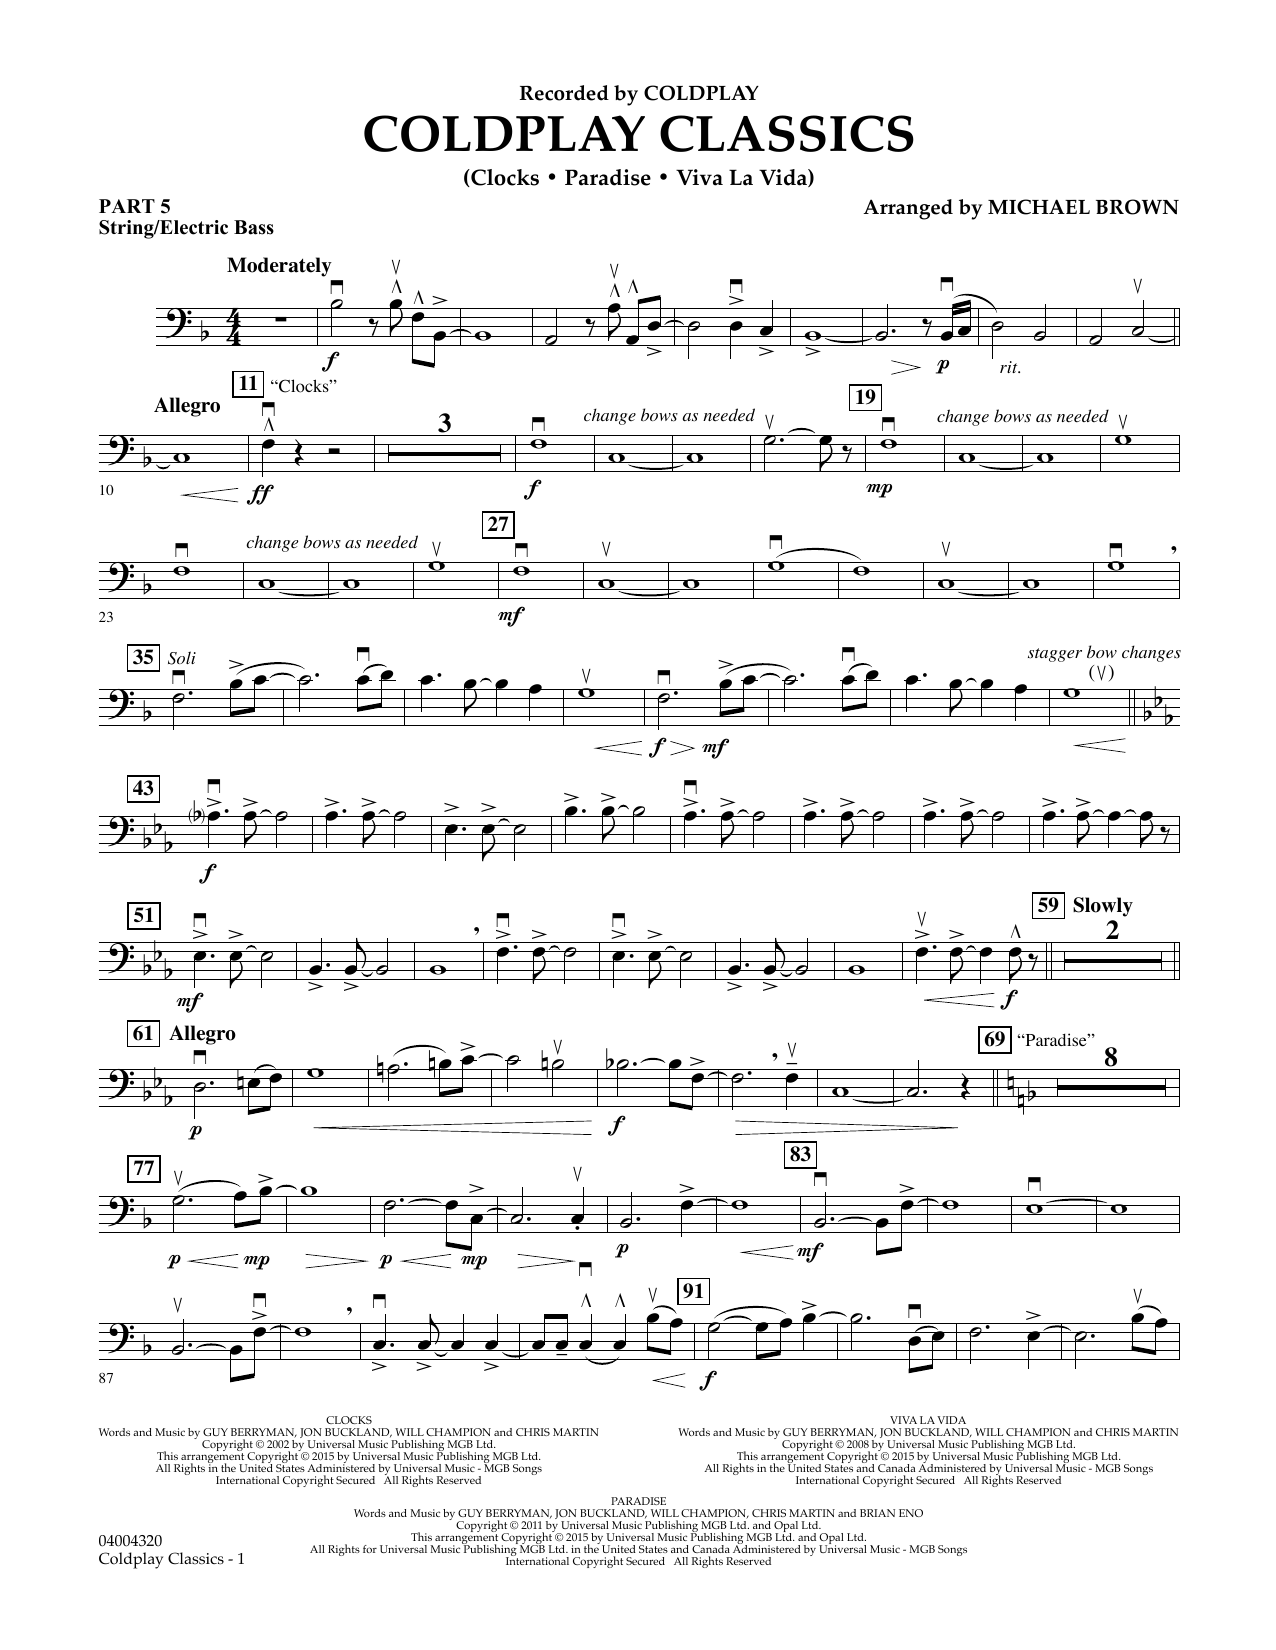 Michael Brown Coldplay Classics - Pt.5 - String/Electric Bass sheet music notes and chords. Download Printable PDF.